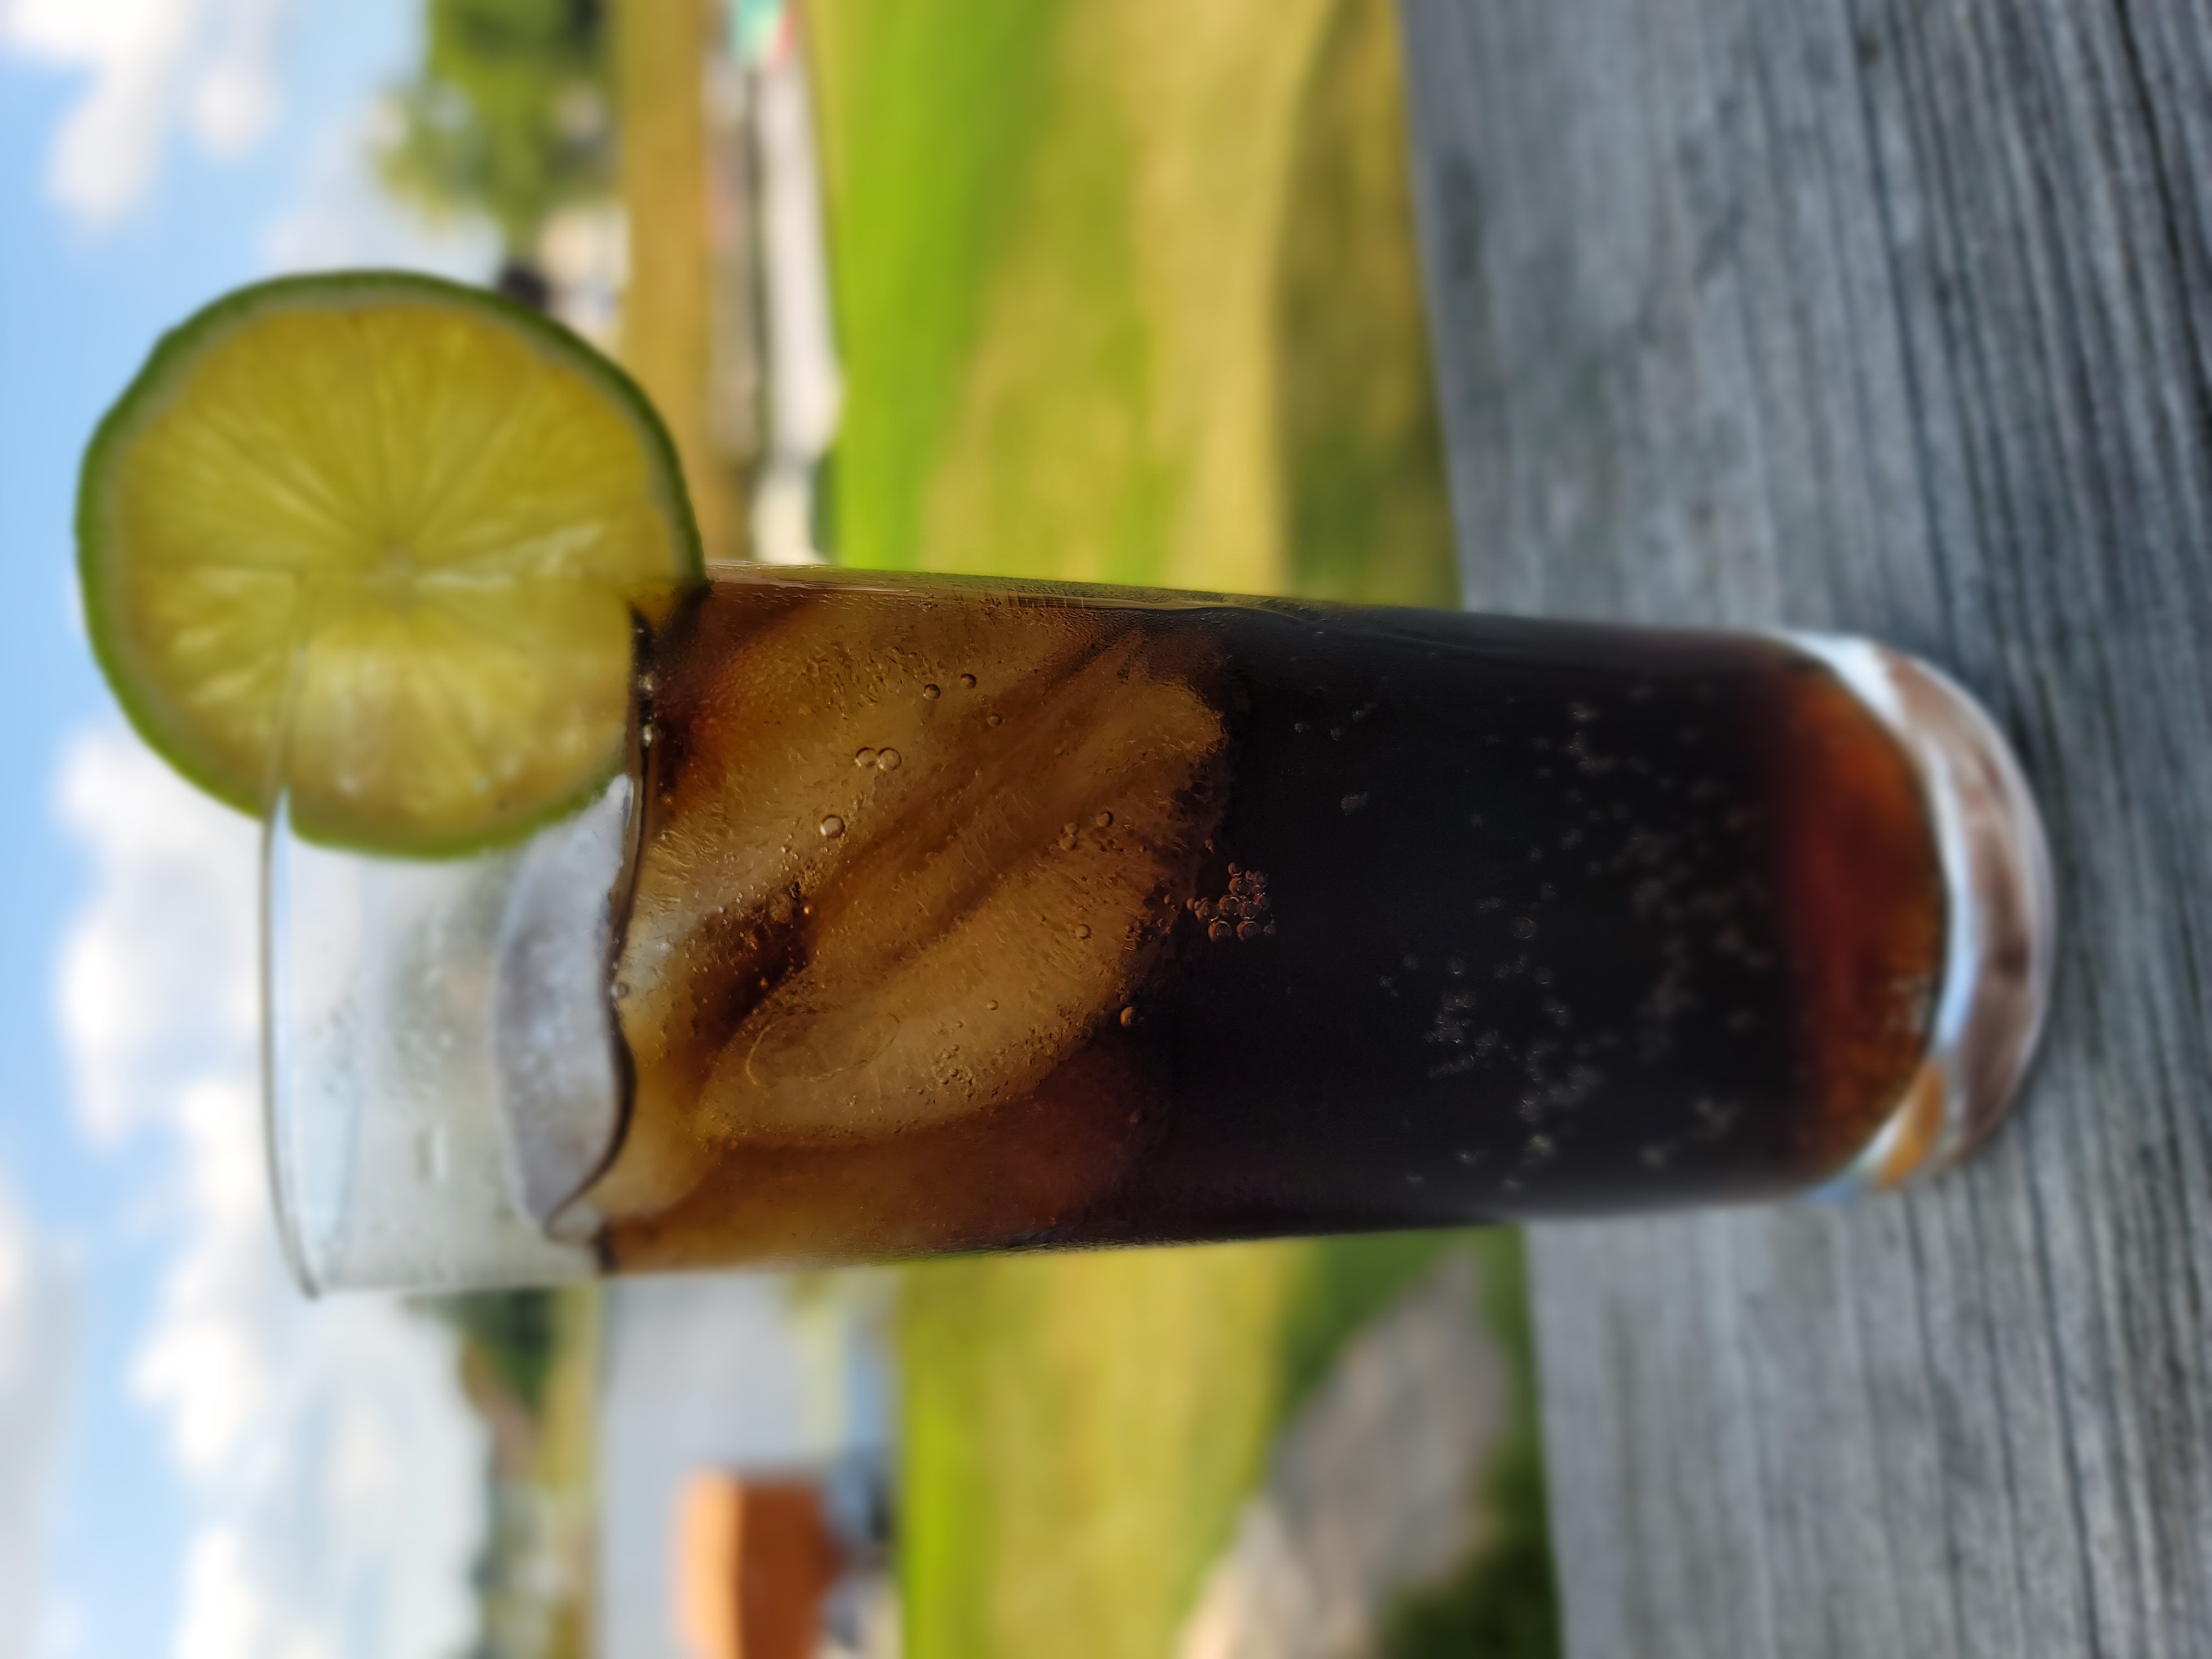 Rum and Coke with lime